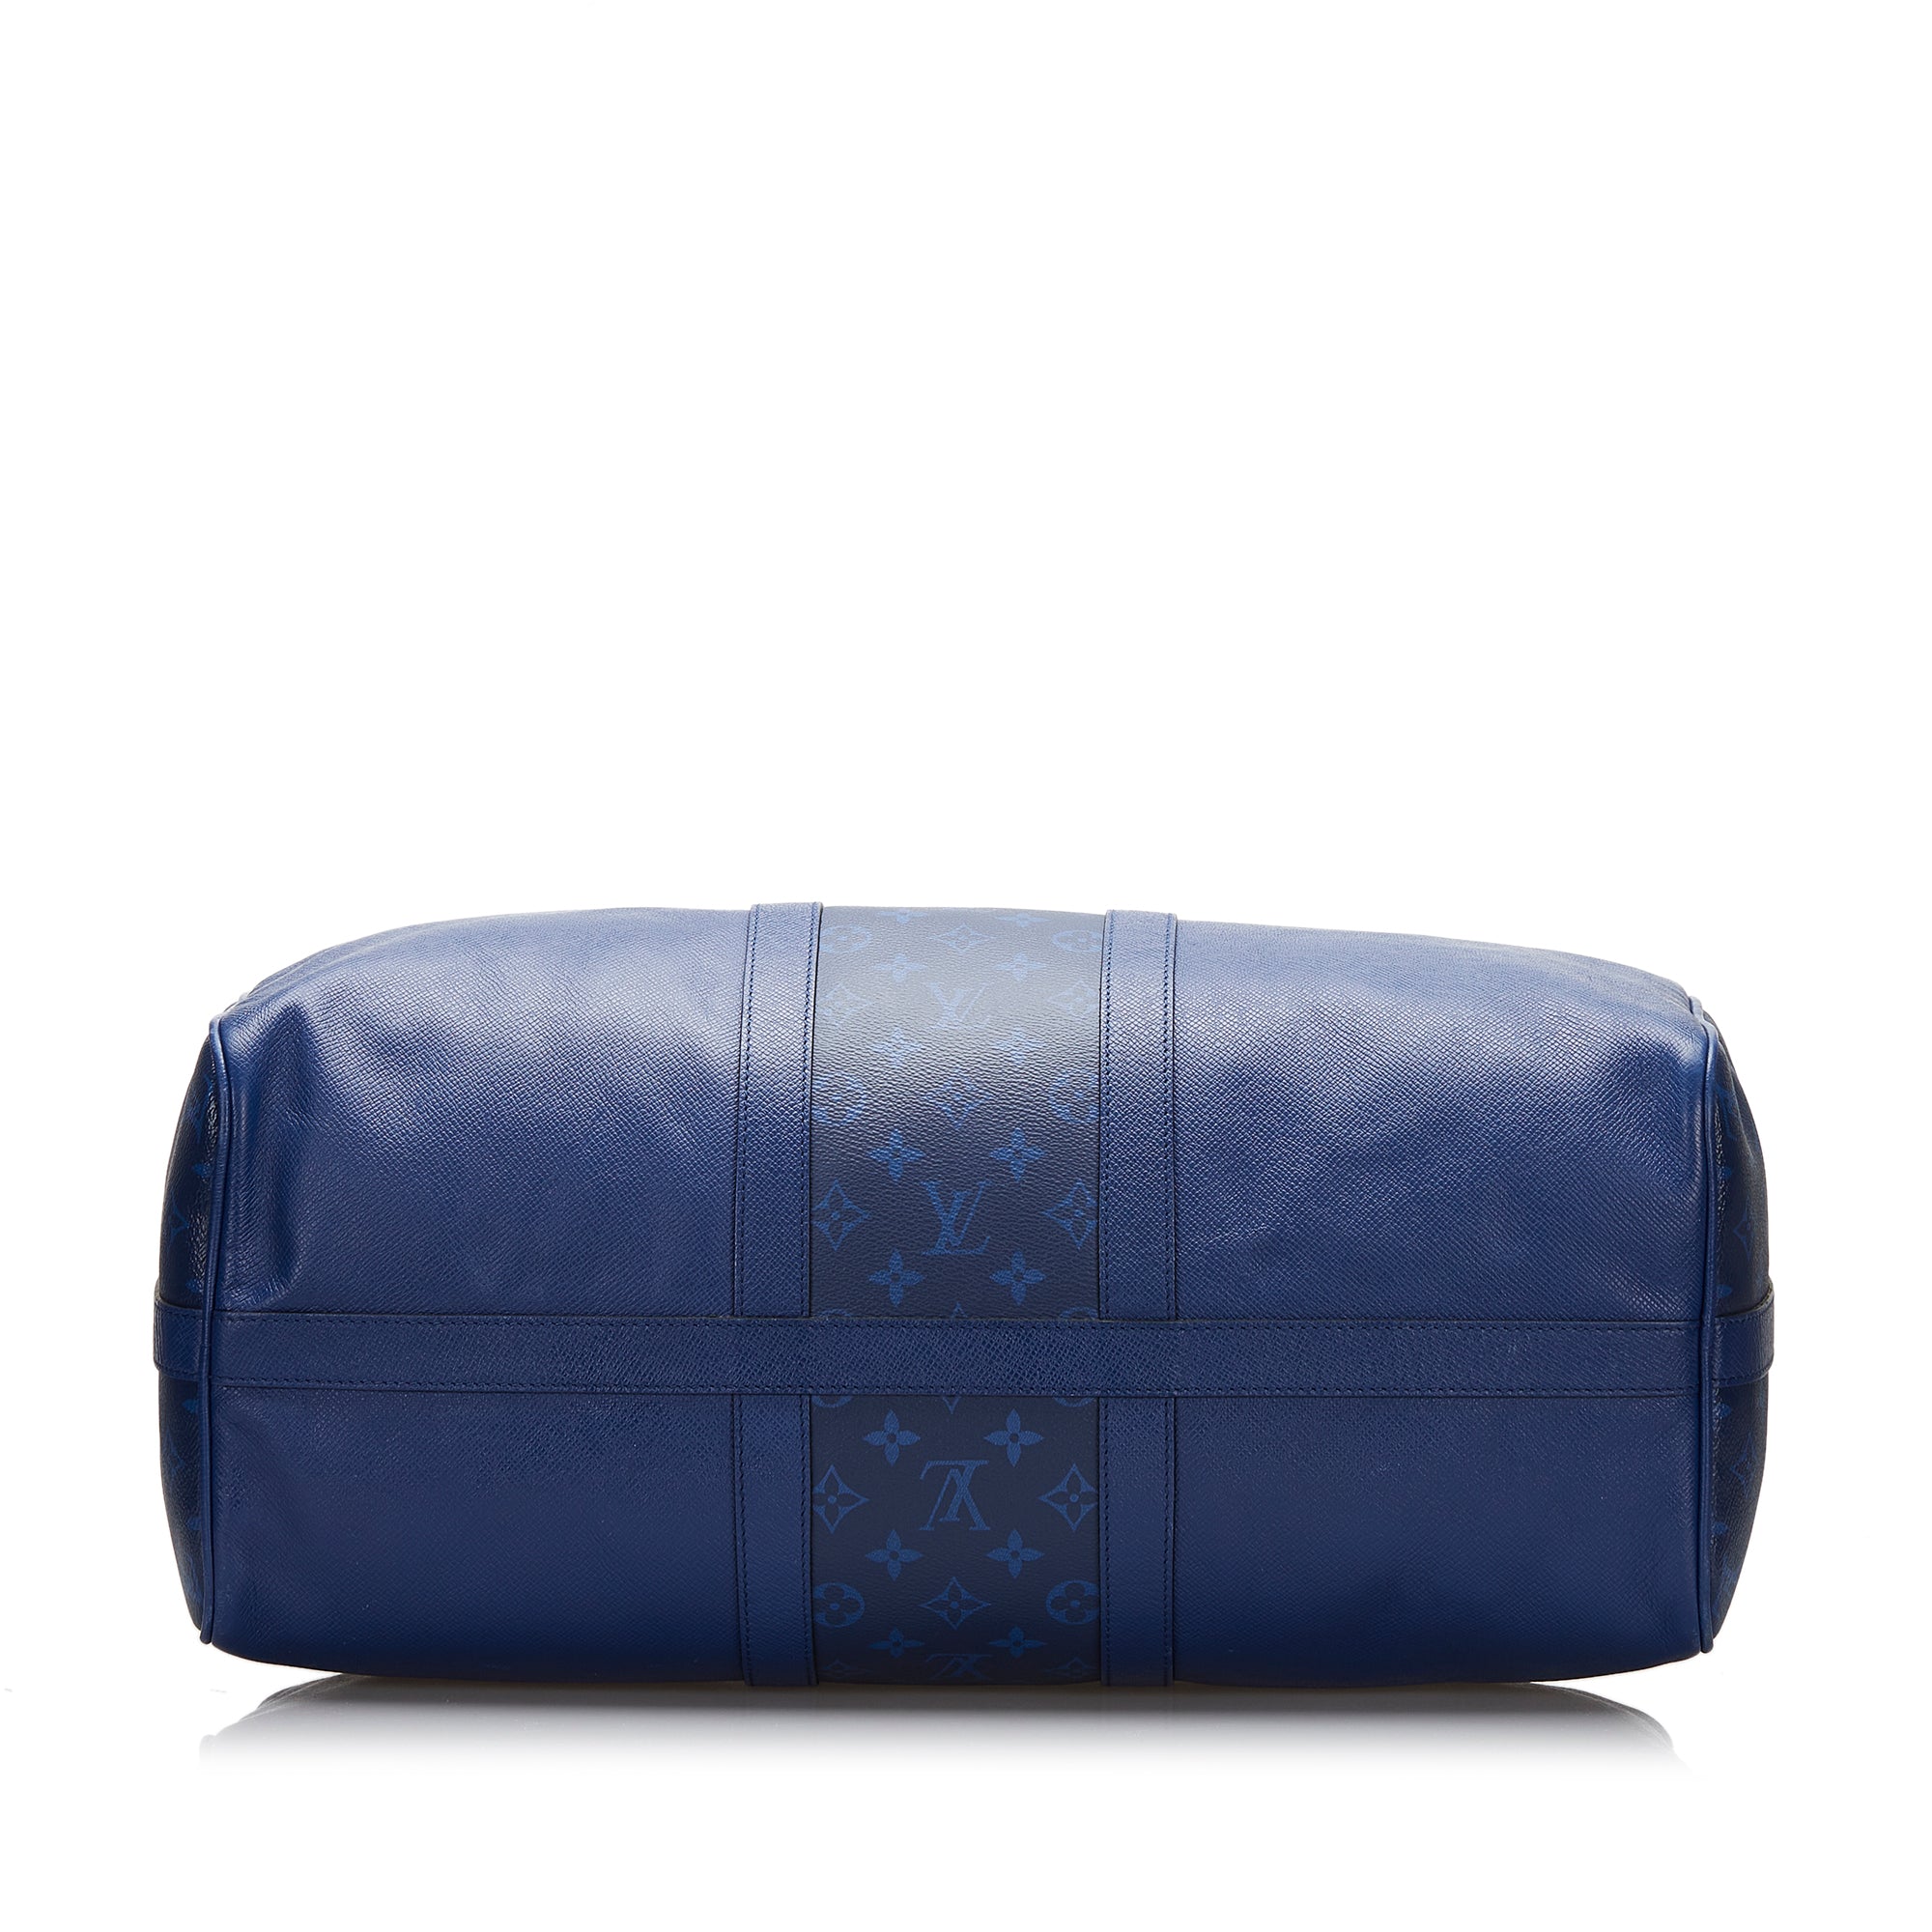 Louis Vuitton Masters Collection Van Gogh Keepall Bandoulière 50 - Blue  Luggage and Travel, Handbags - LOU575102